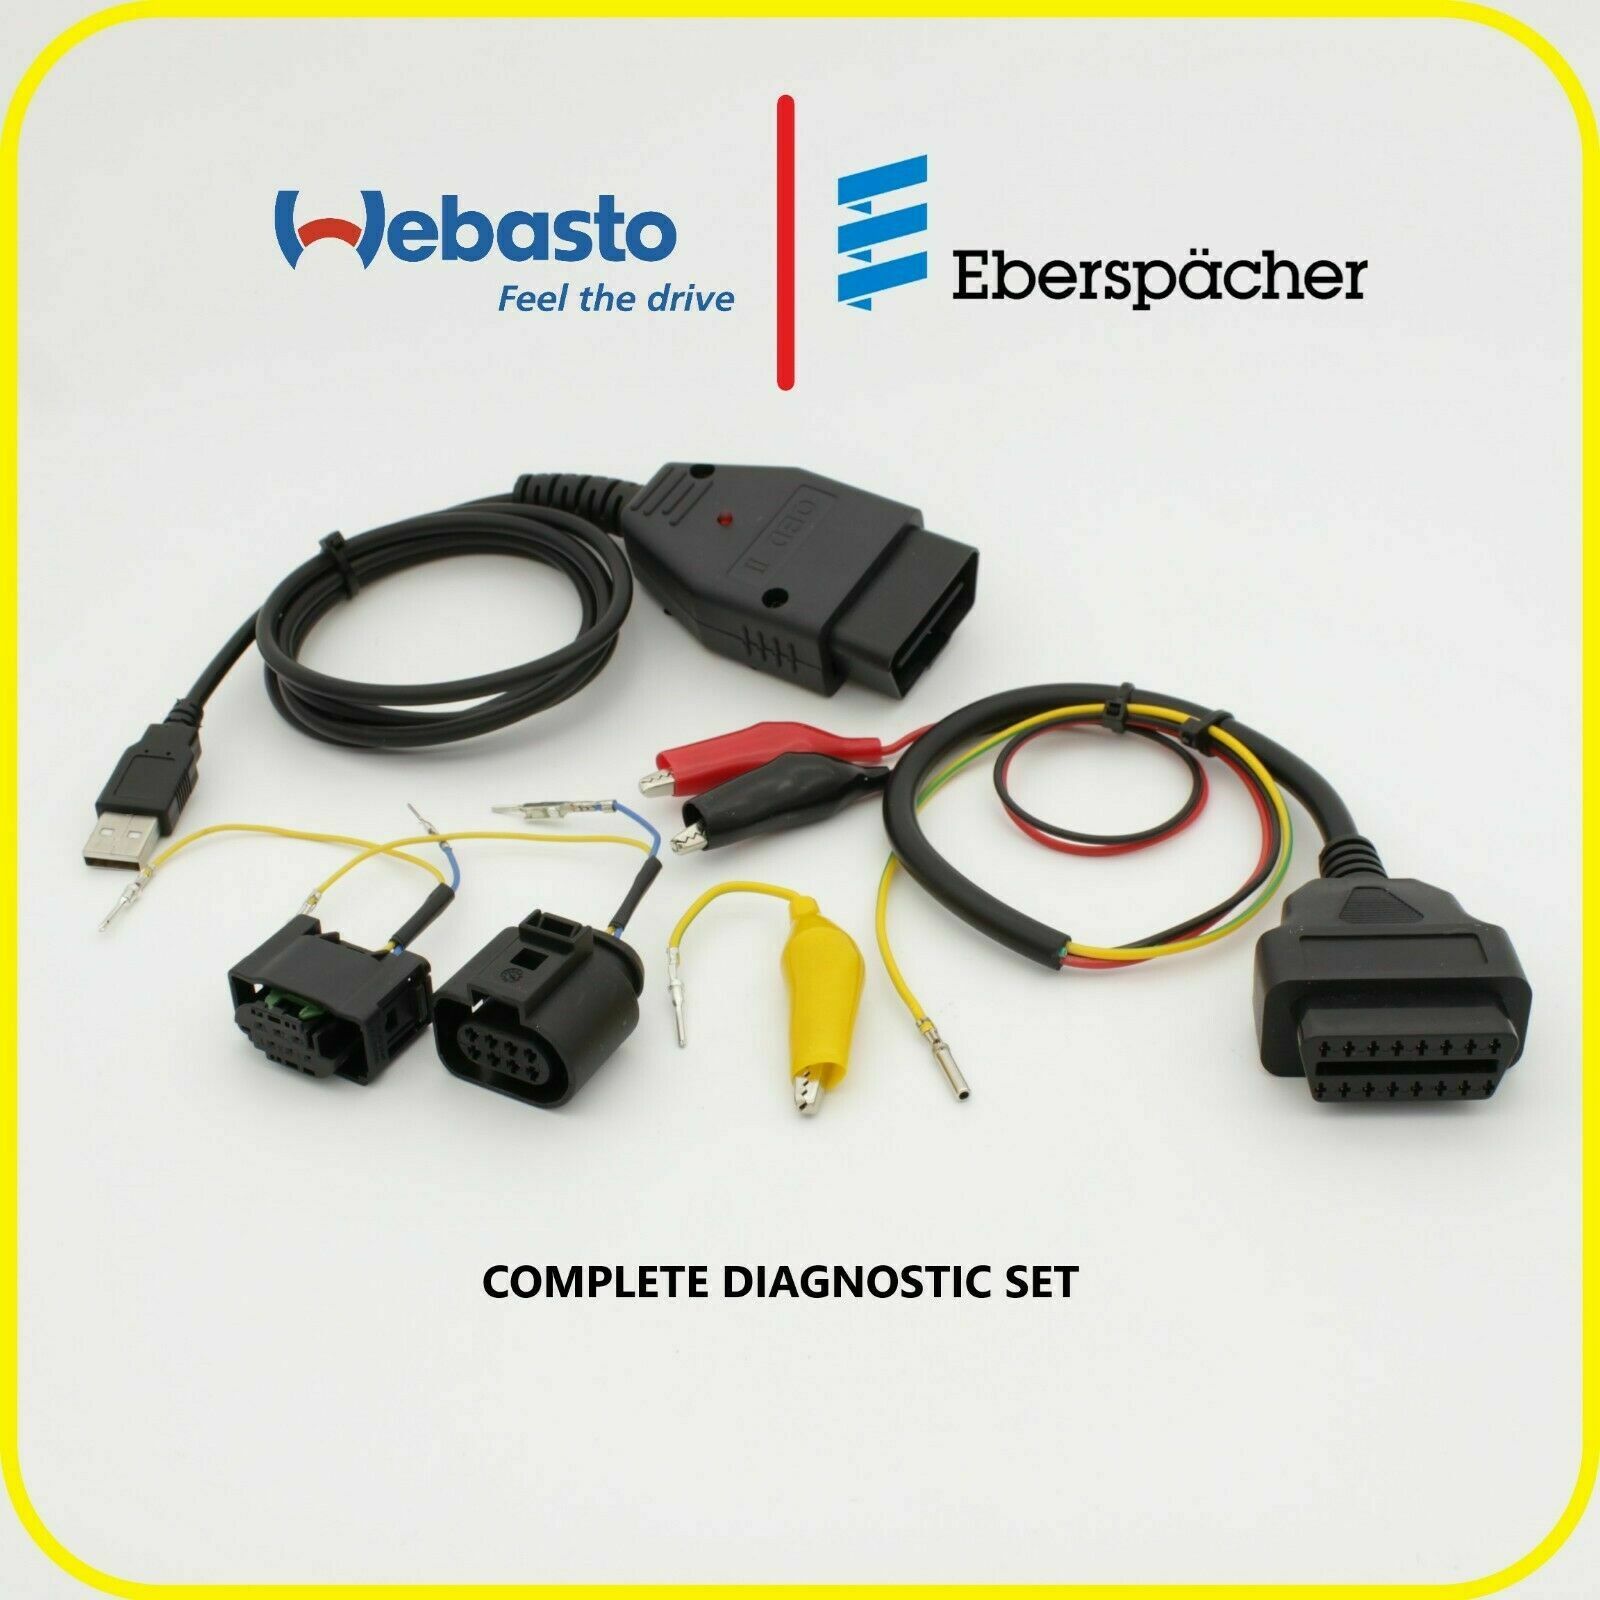 Webasto & Eberspächer diagnostic tool with software and 2 additional  connectors – Matthew Navis